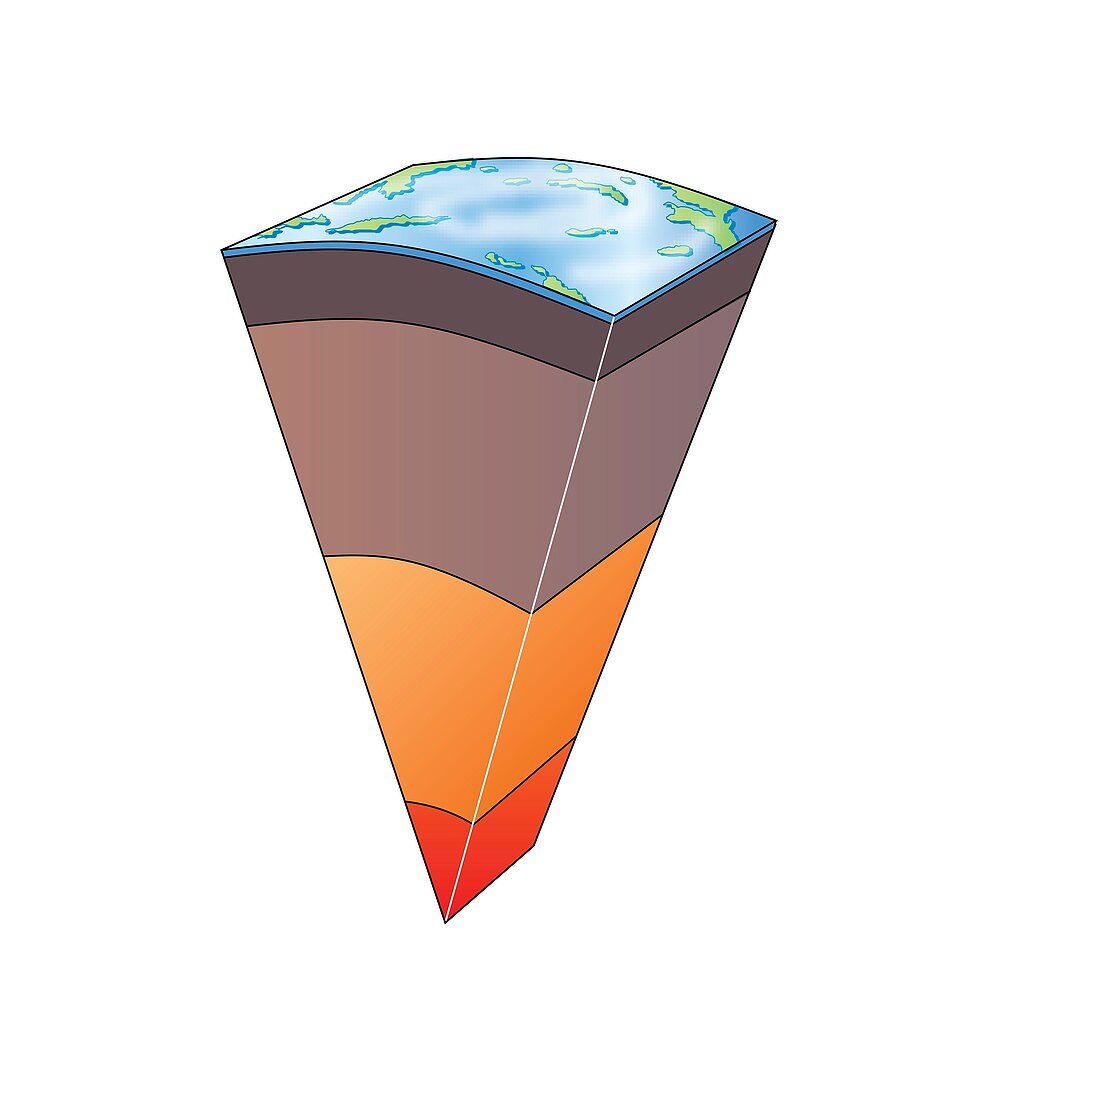 Earth's structure, illustration